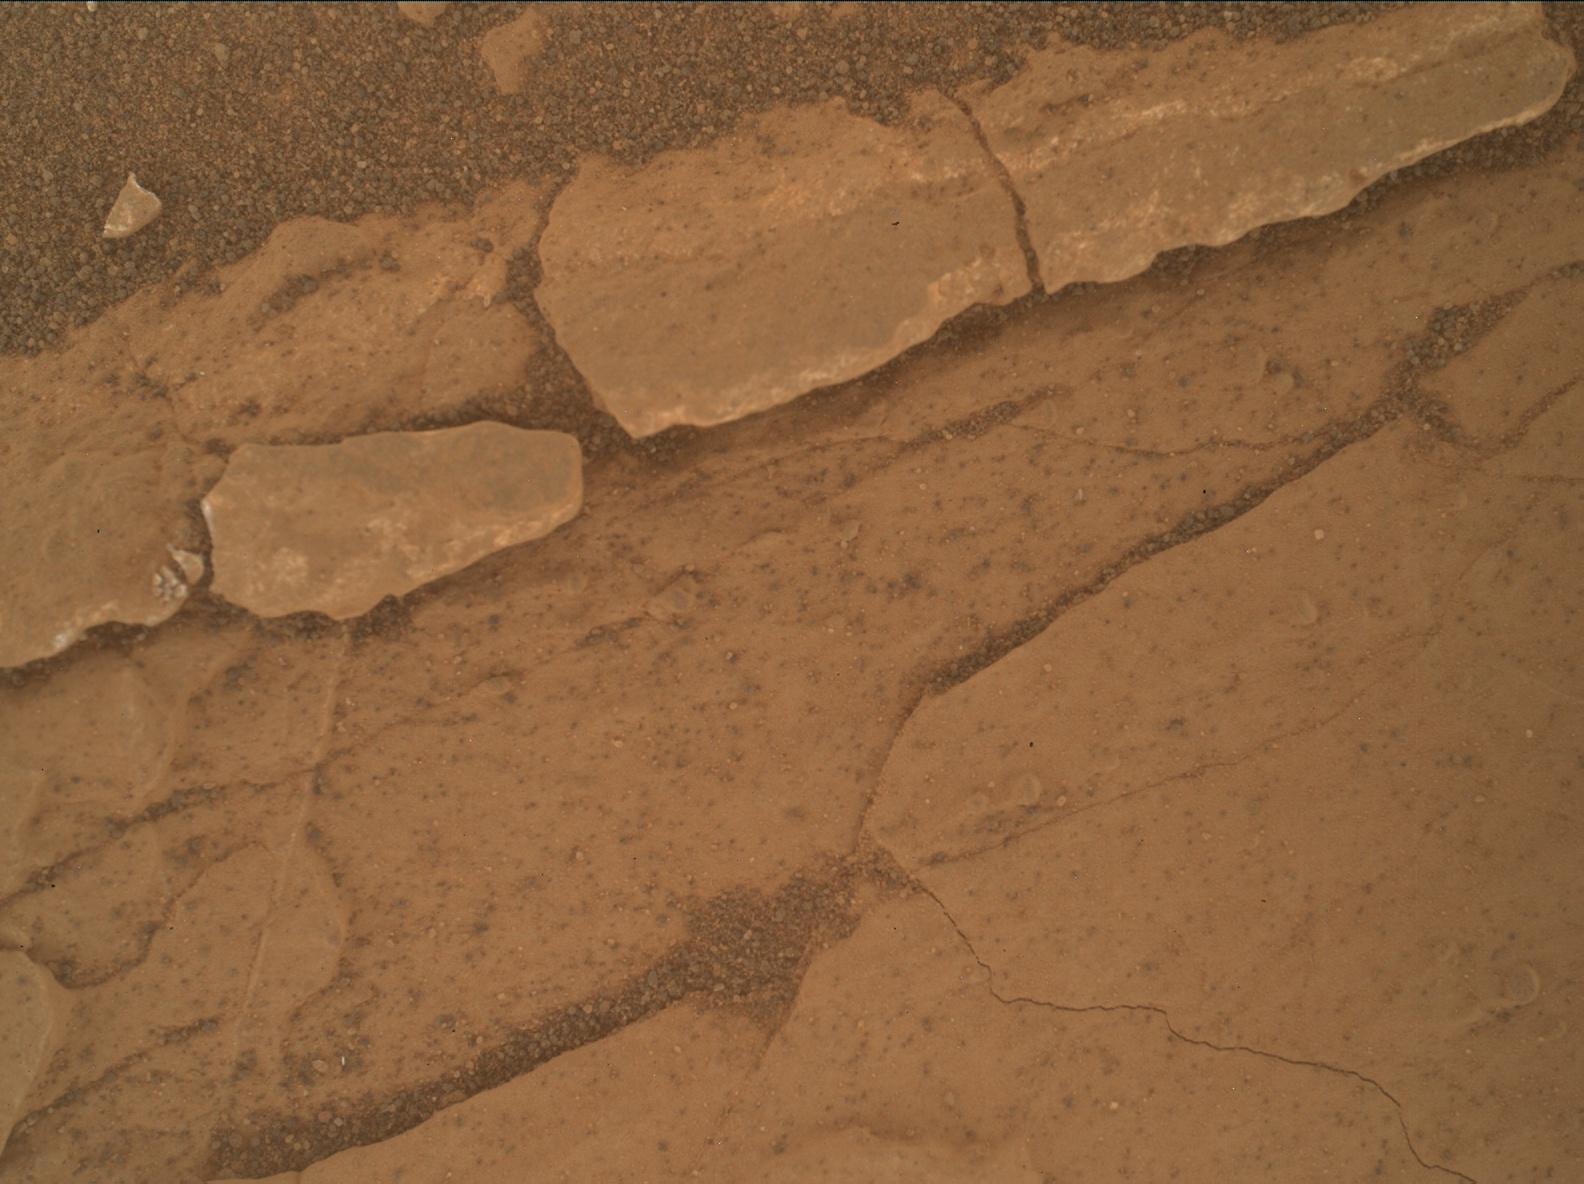 Nasa's Mars rover Curiosity acquired this image using its Mars Hand Lens Imager (MAHLI) on Sol 3071